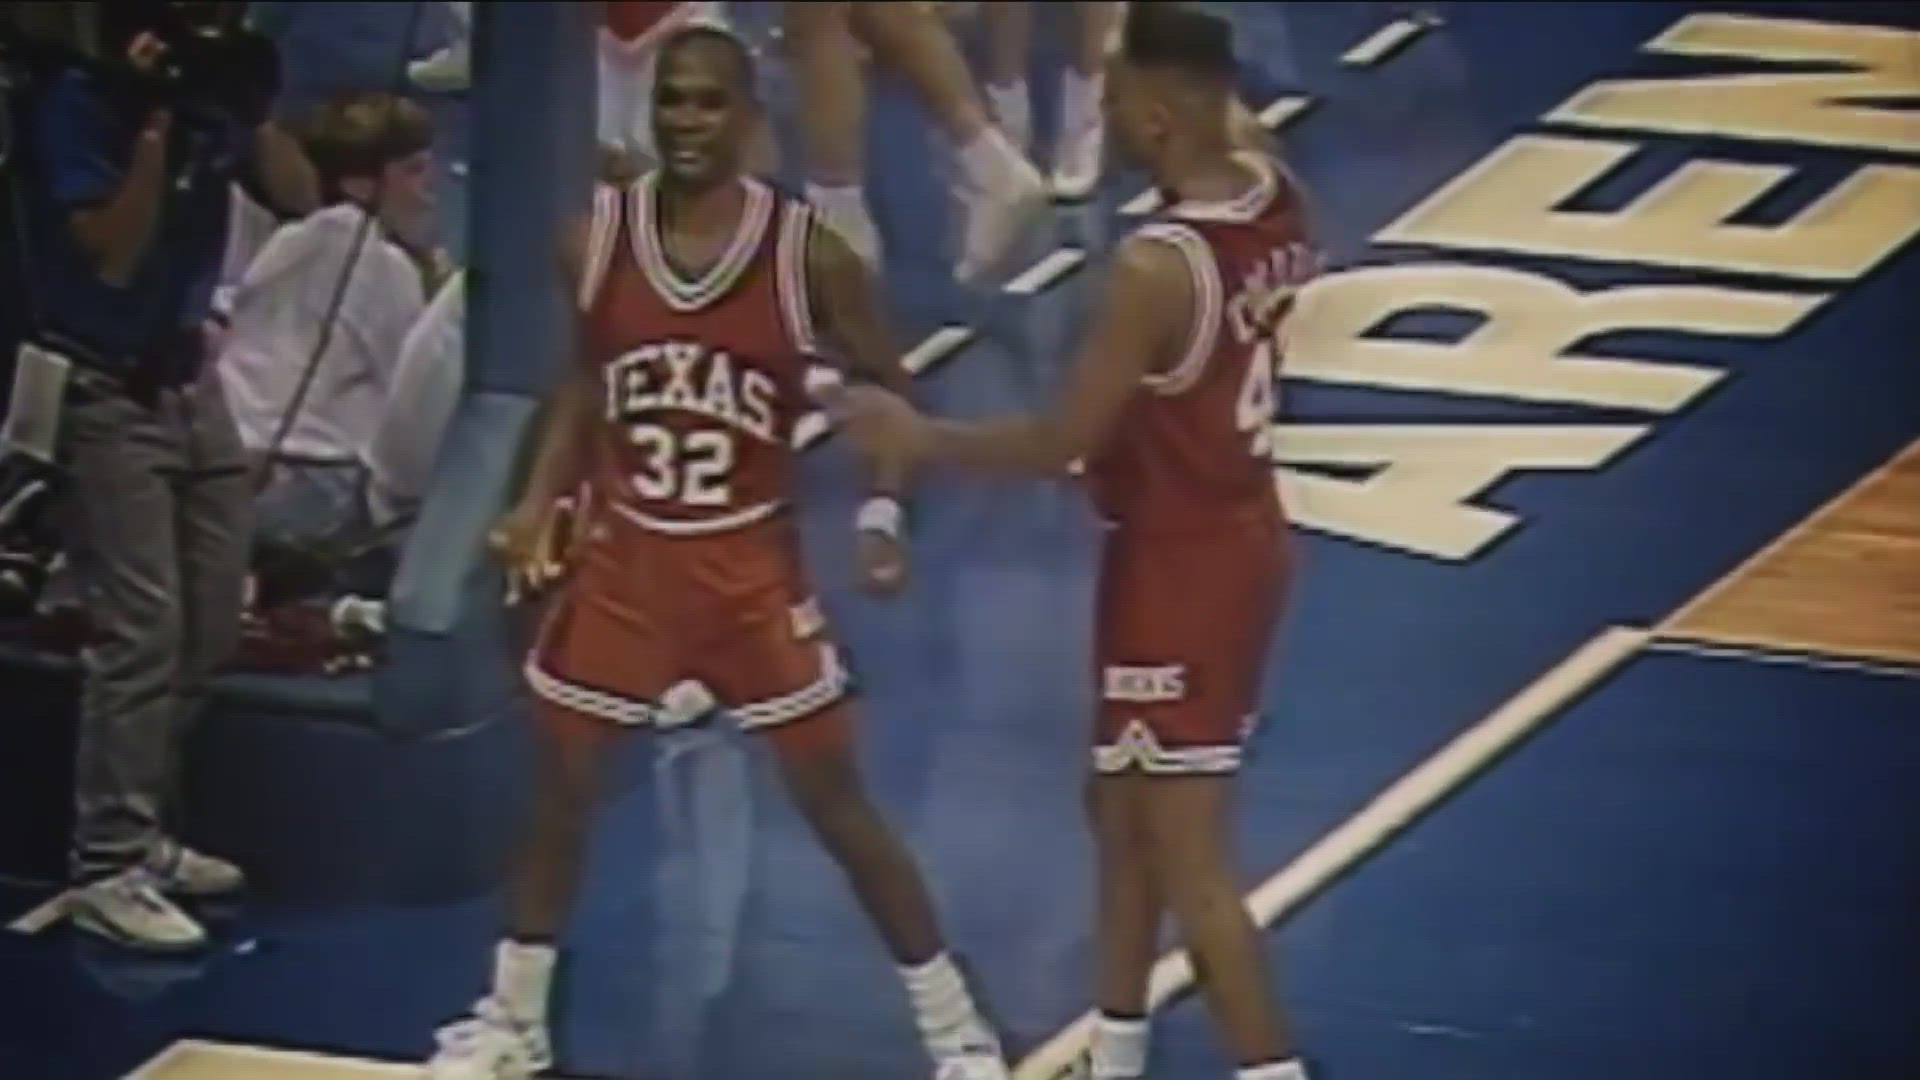 Blanks was part of the legendary 1990 Longhorns squad that made it to the Elite 8.